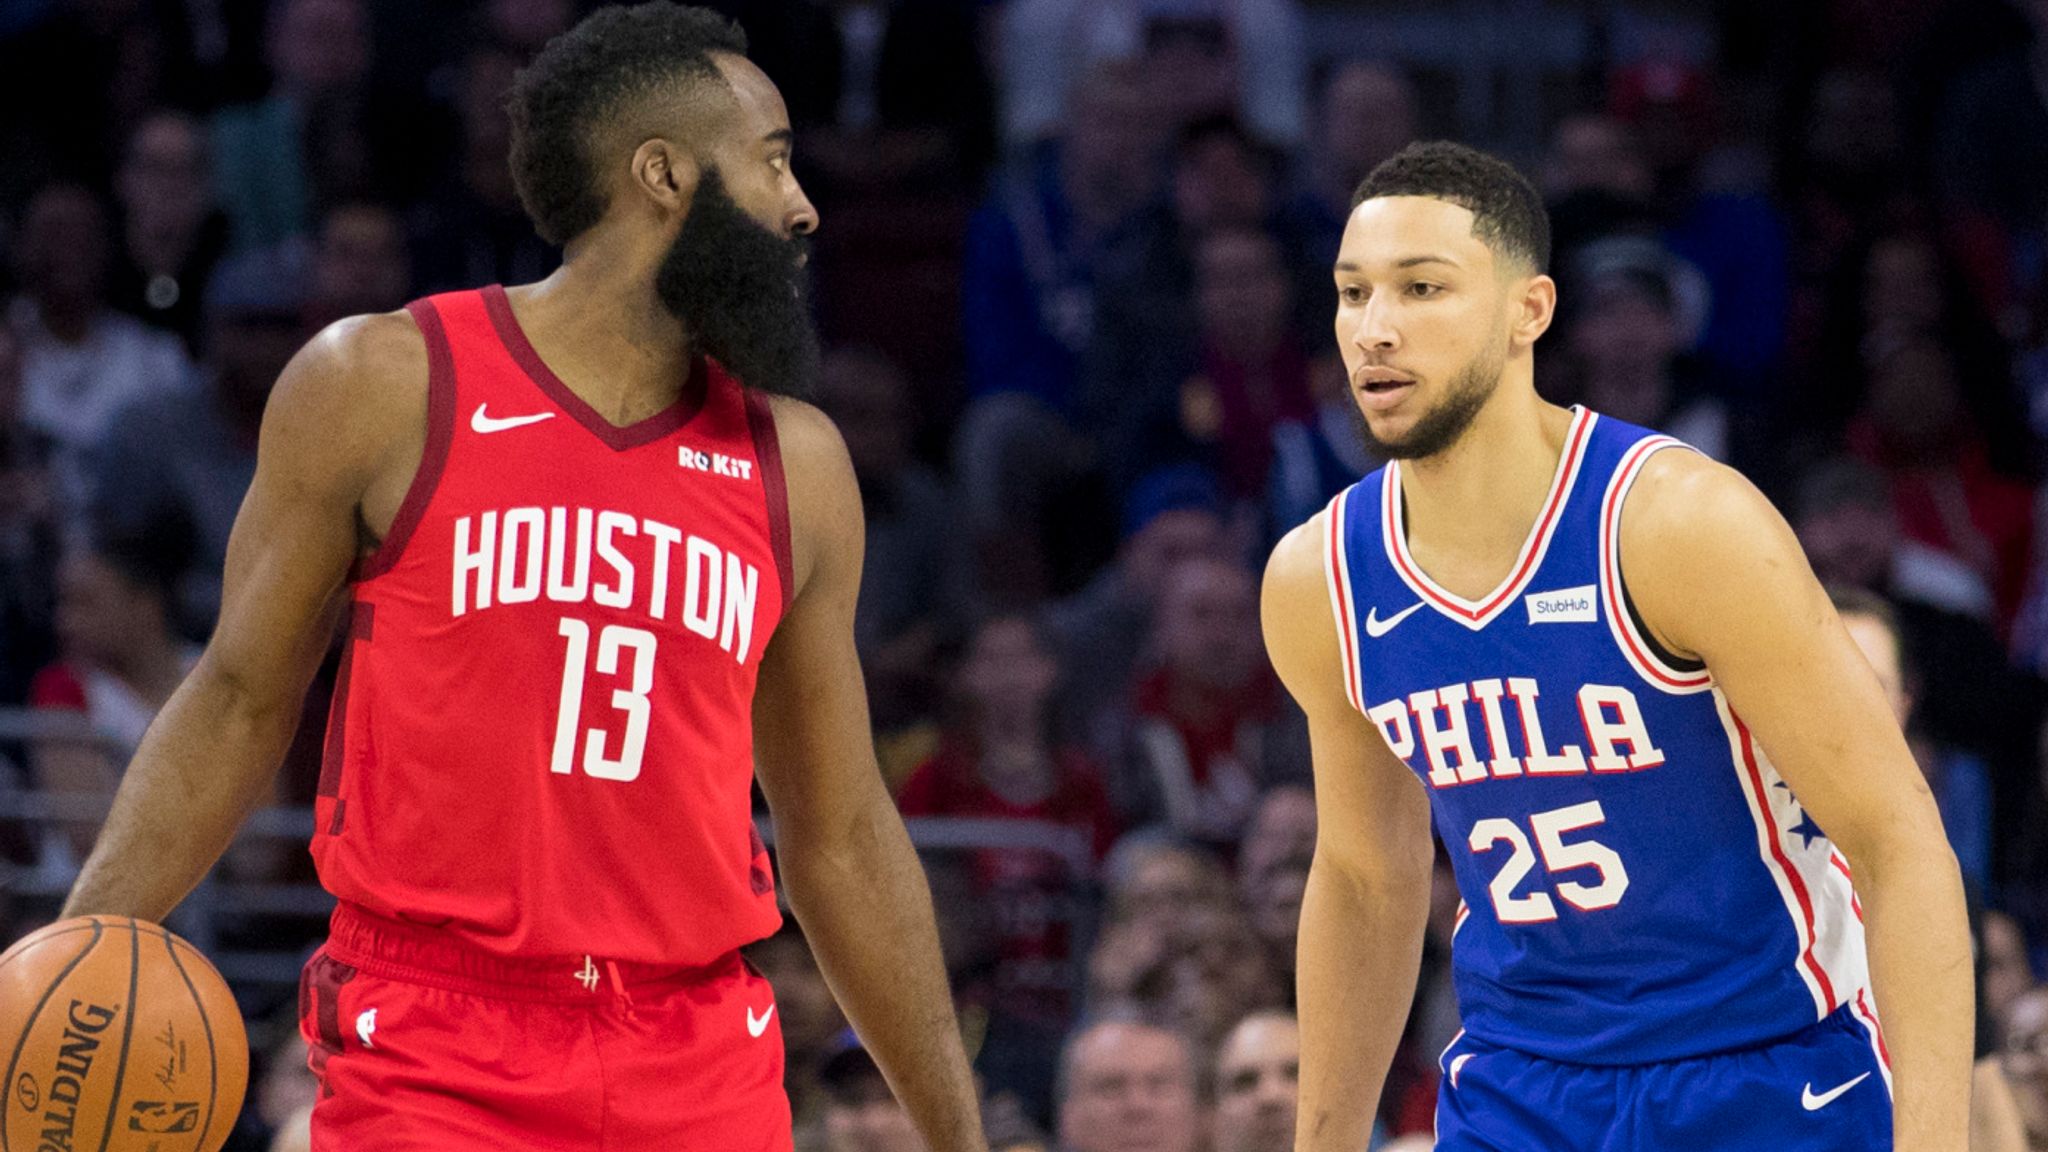 James Harden joins Joel Embiid at Philadelphia 76ers in blockbuster trade  which sends Ben Simmons to Brooklyn Nets, NBA News